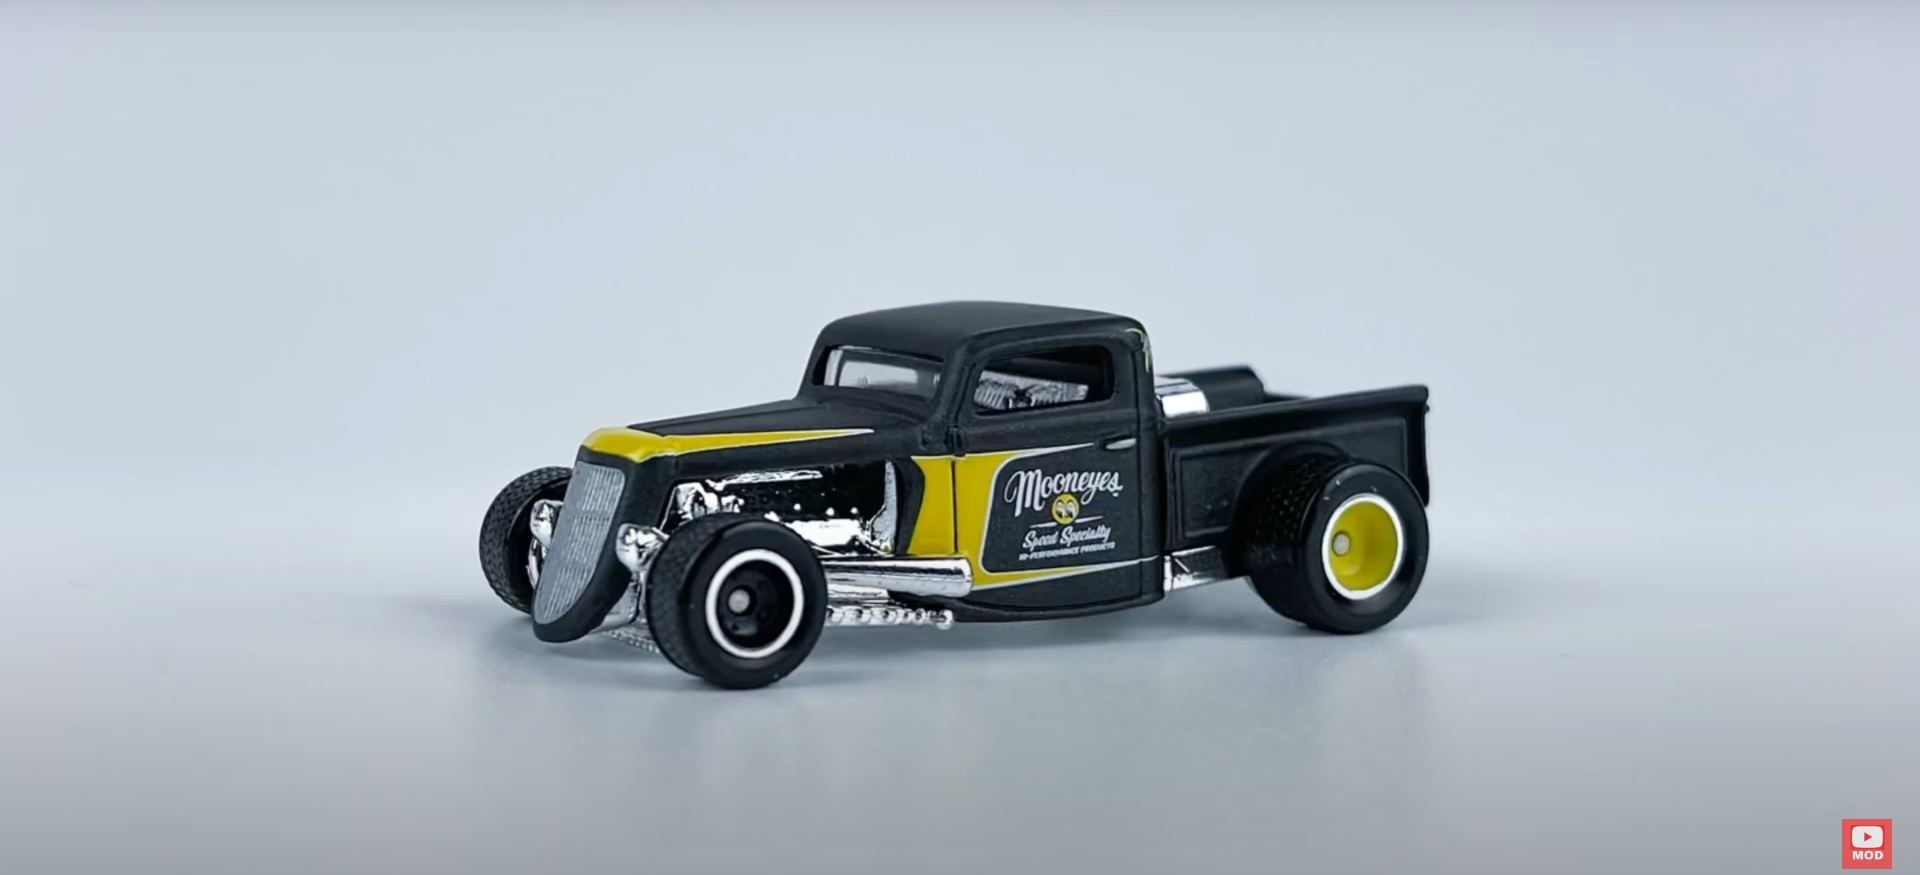 Inside the 2022 Matchbox Collectors Mix 2, 1964 Chevy C10 Is the Star ...